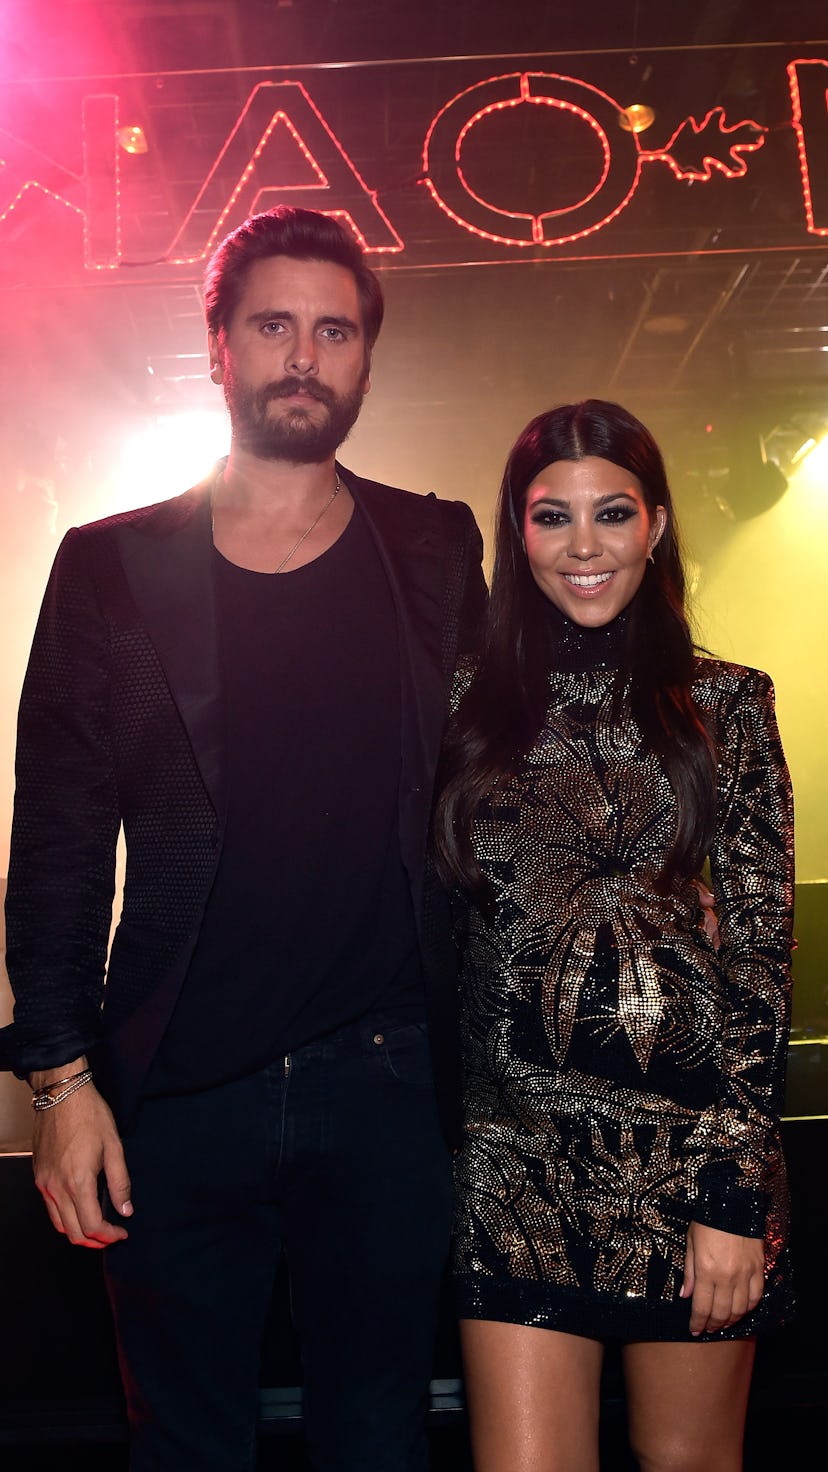 LAS VEGAS, NV - MAY 23:  (EXCLUSIVE COVERAGE) Television personalities Scott Disick (L) and Kourtney...